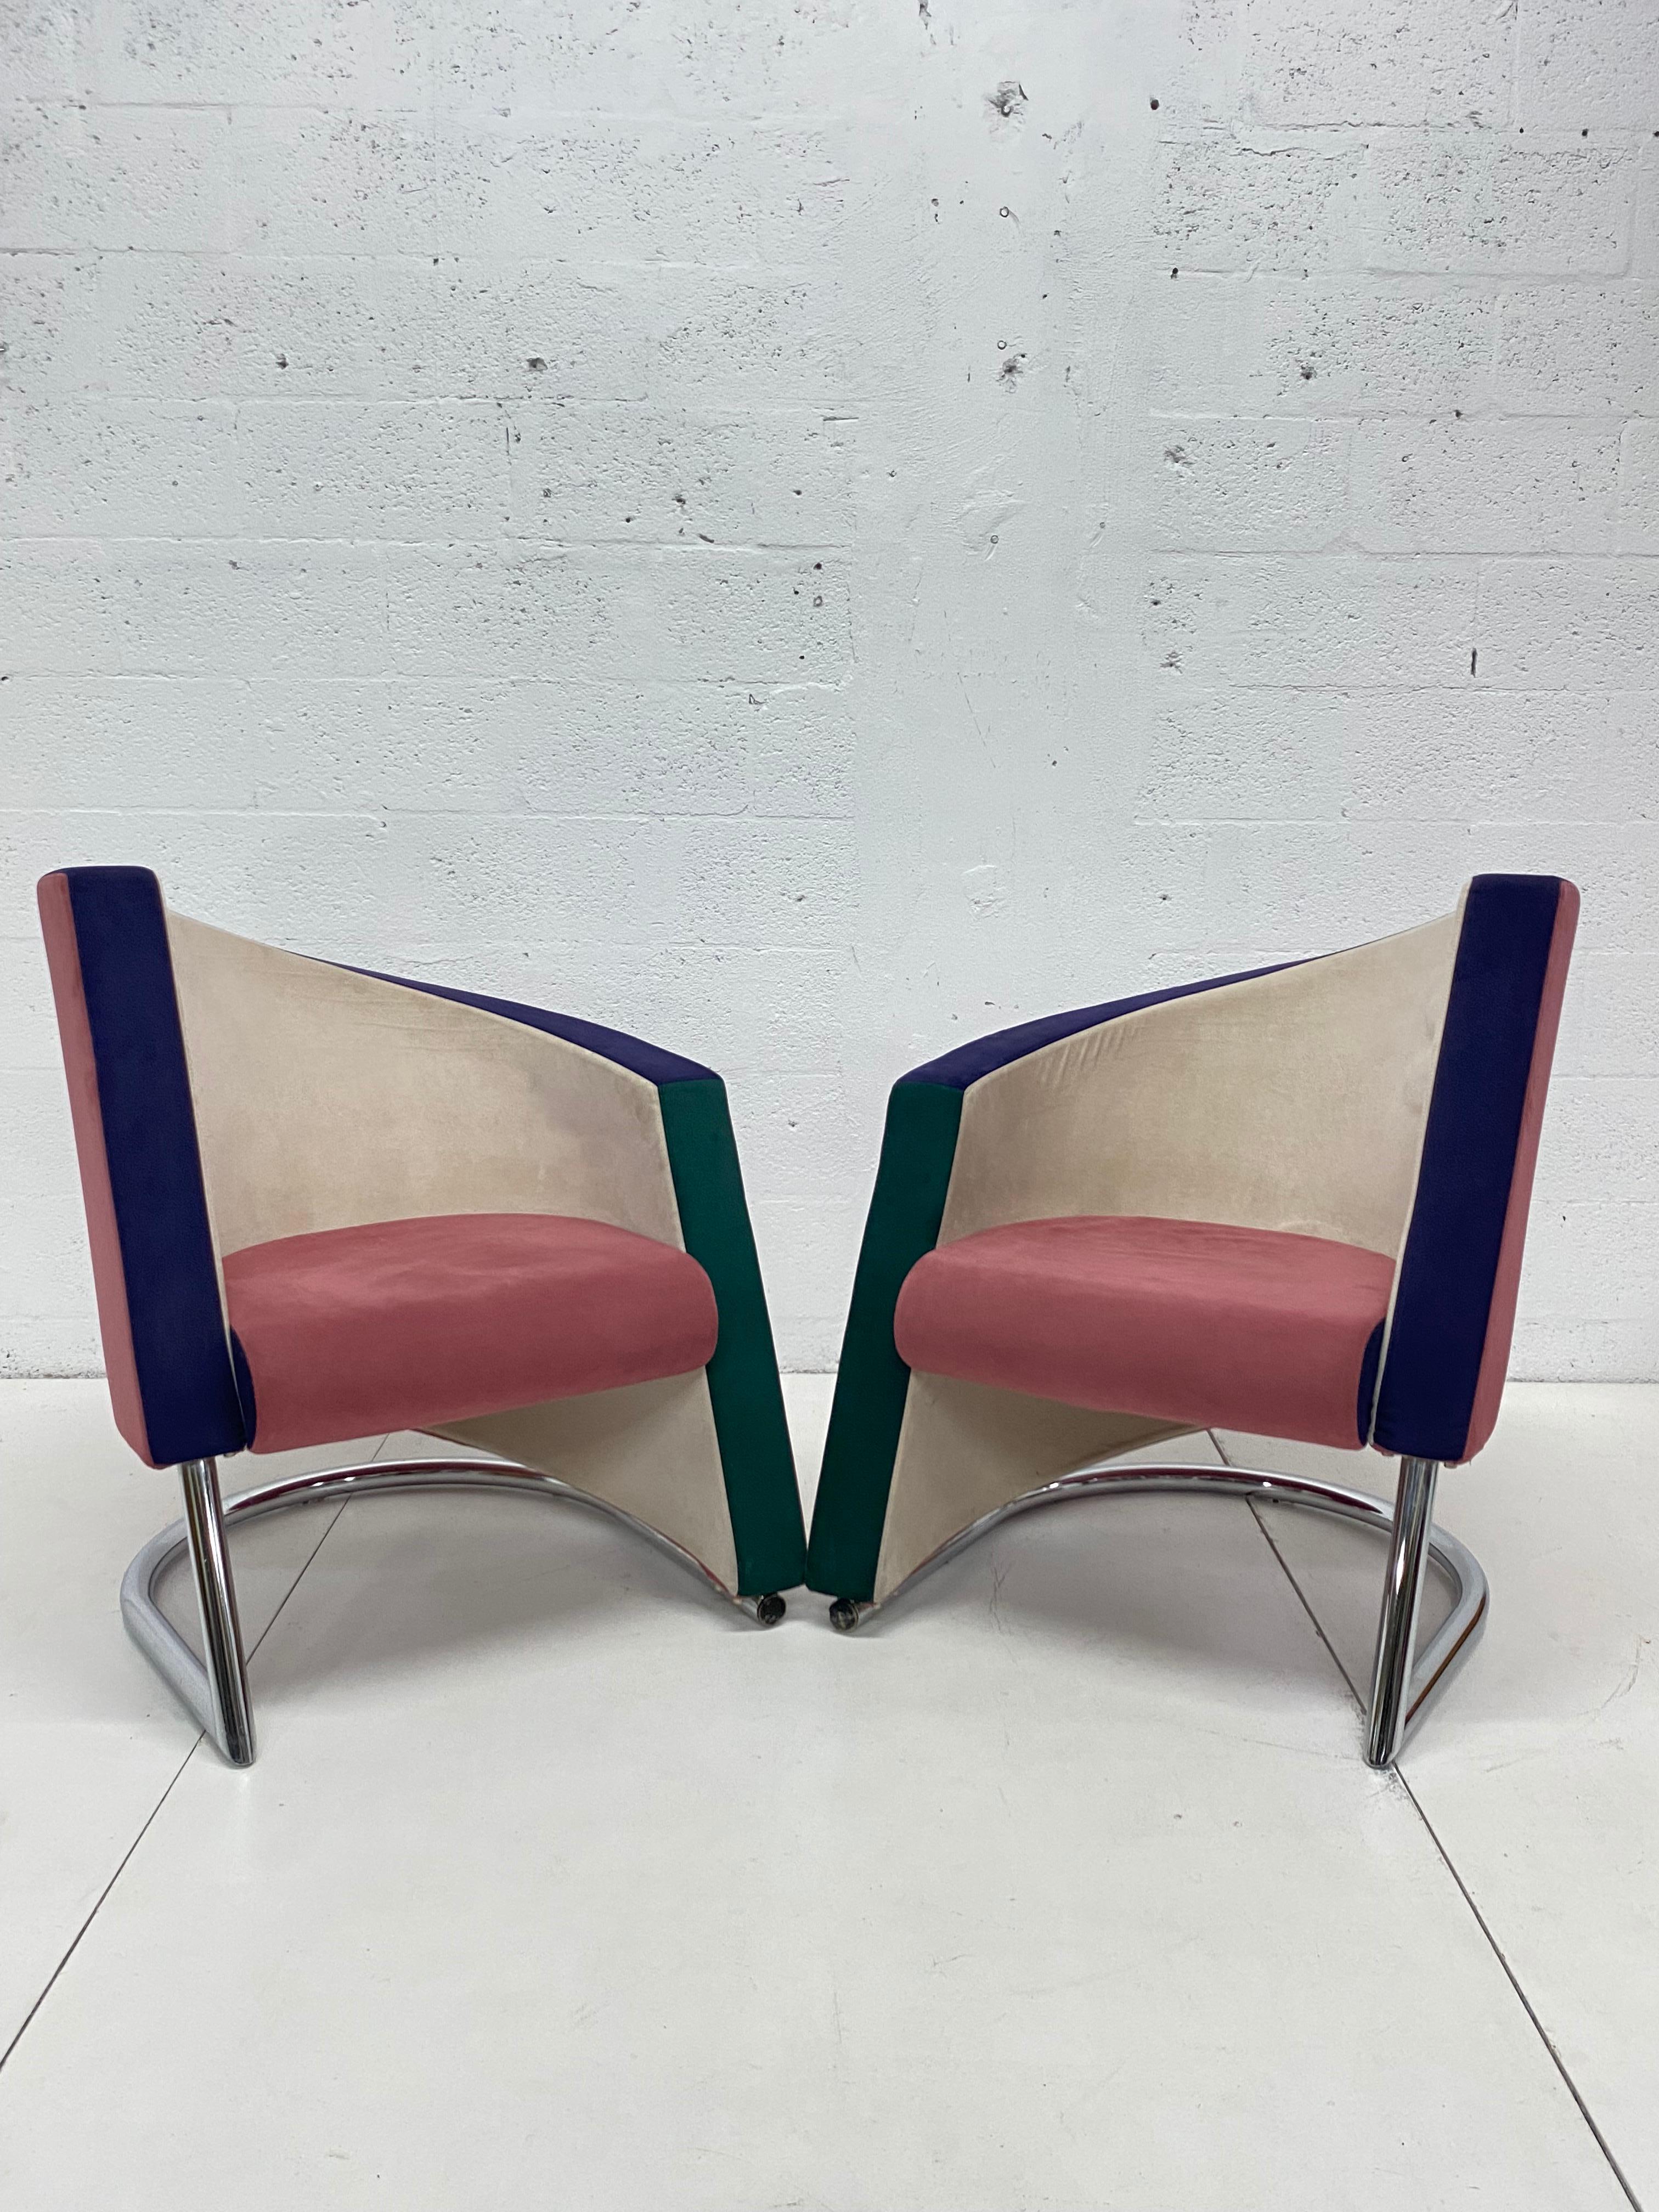 Formica Post Modern Opposing Club Chairs with Tubular Chrome Bases by Westnofa, a Pair